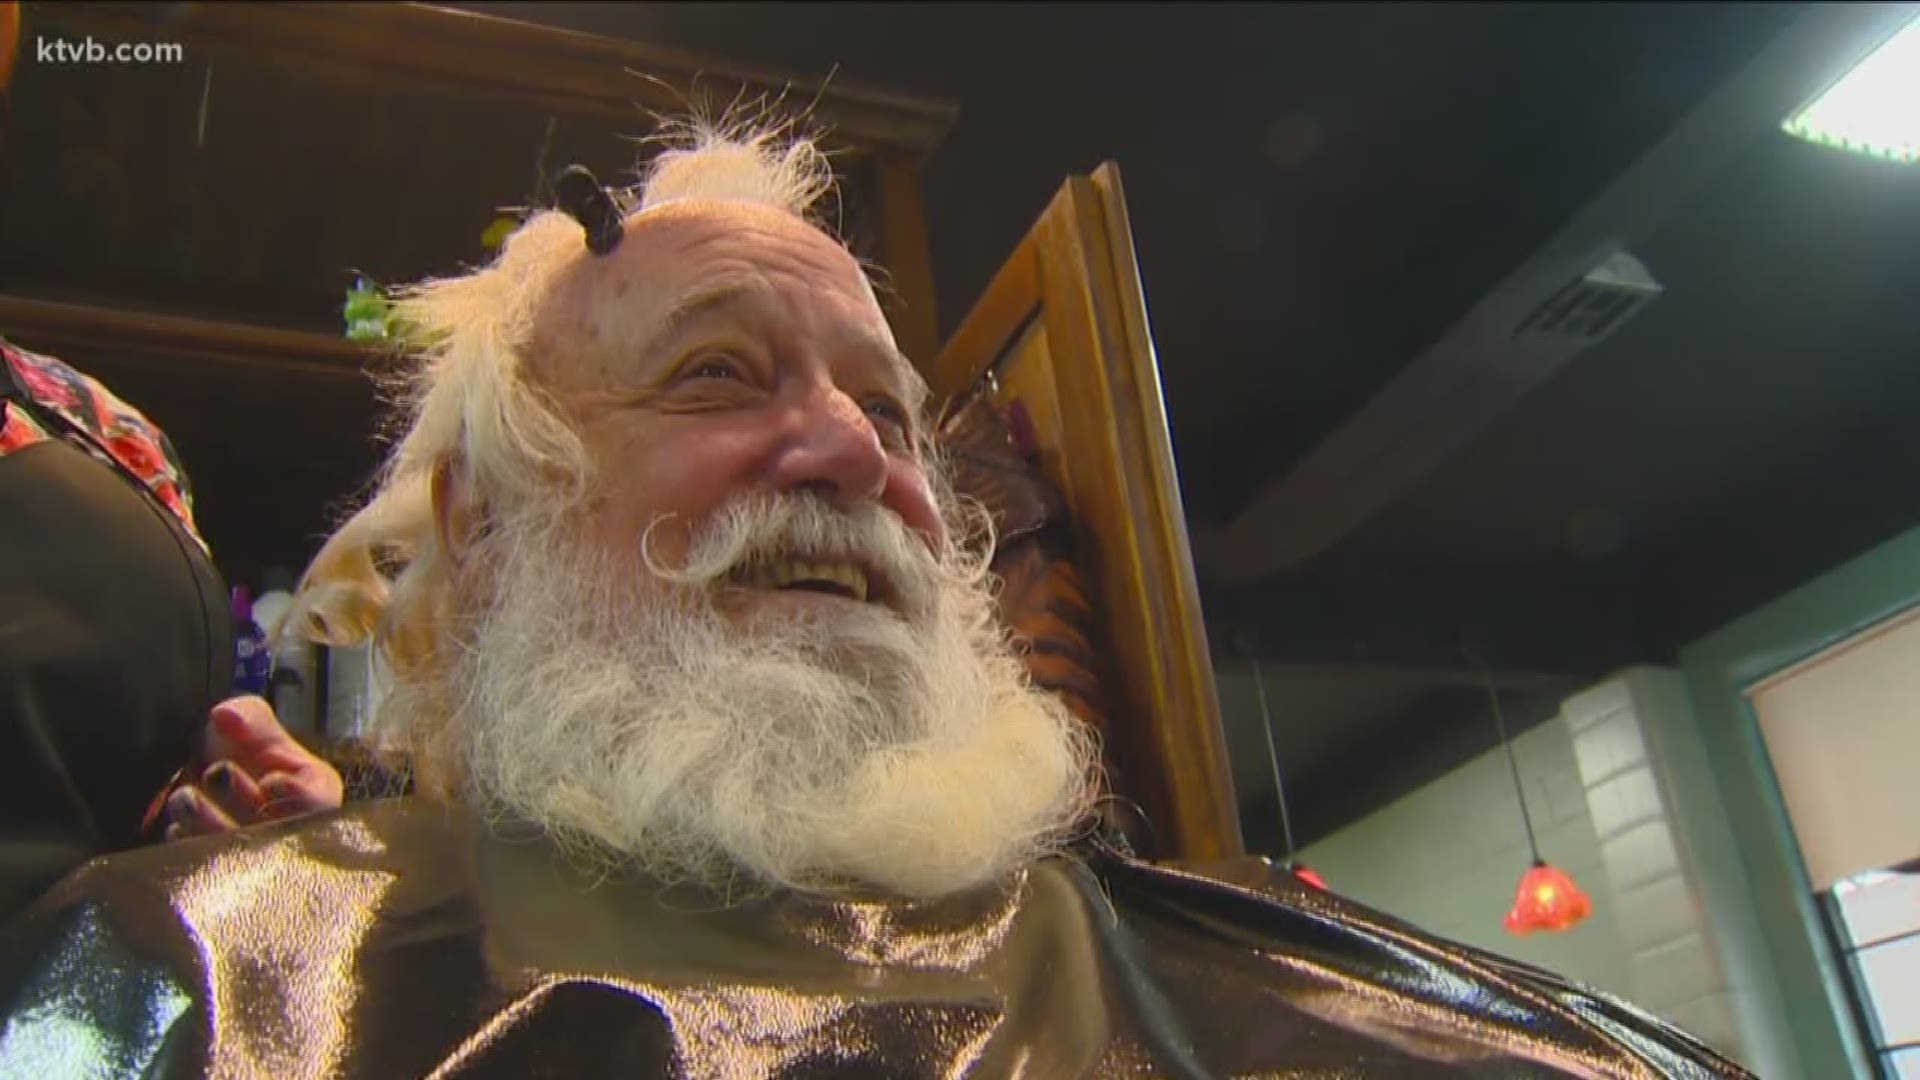 Santa took a break from visiting kids at Boise Towne Square Mall so he could get a haircut at a local salon.